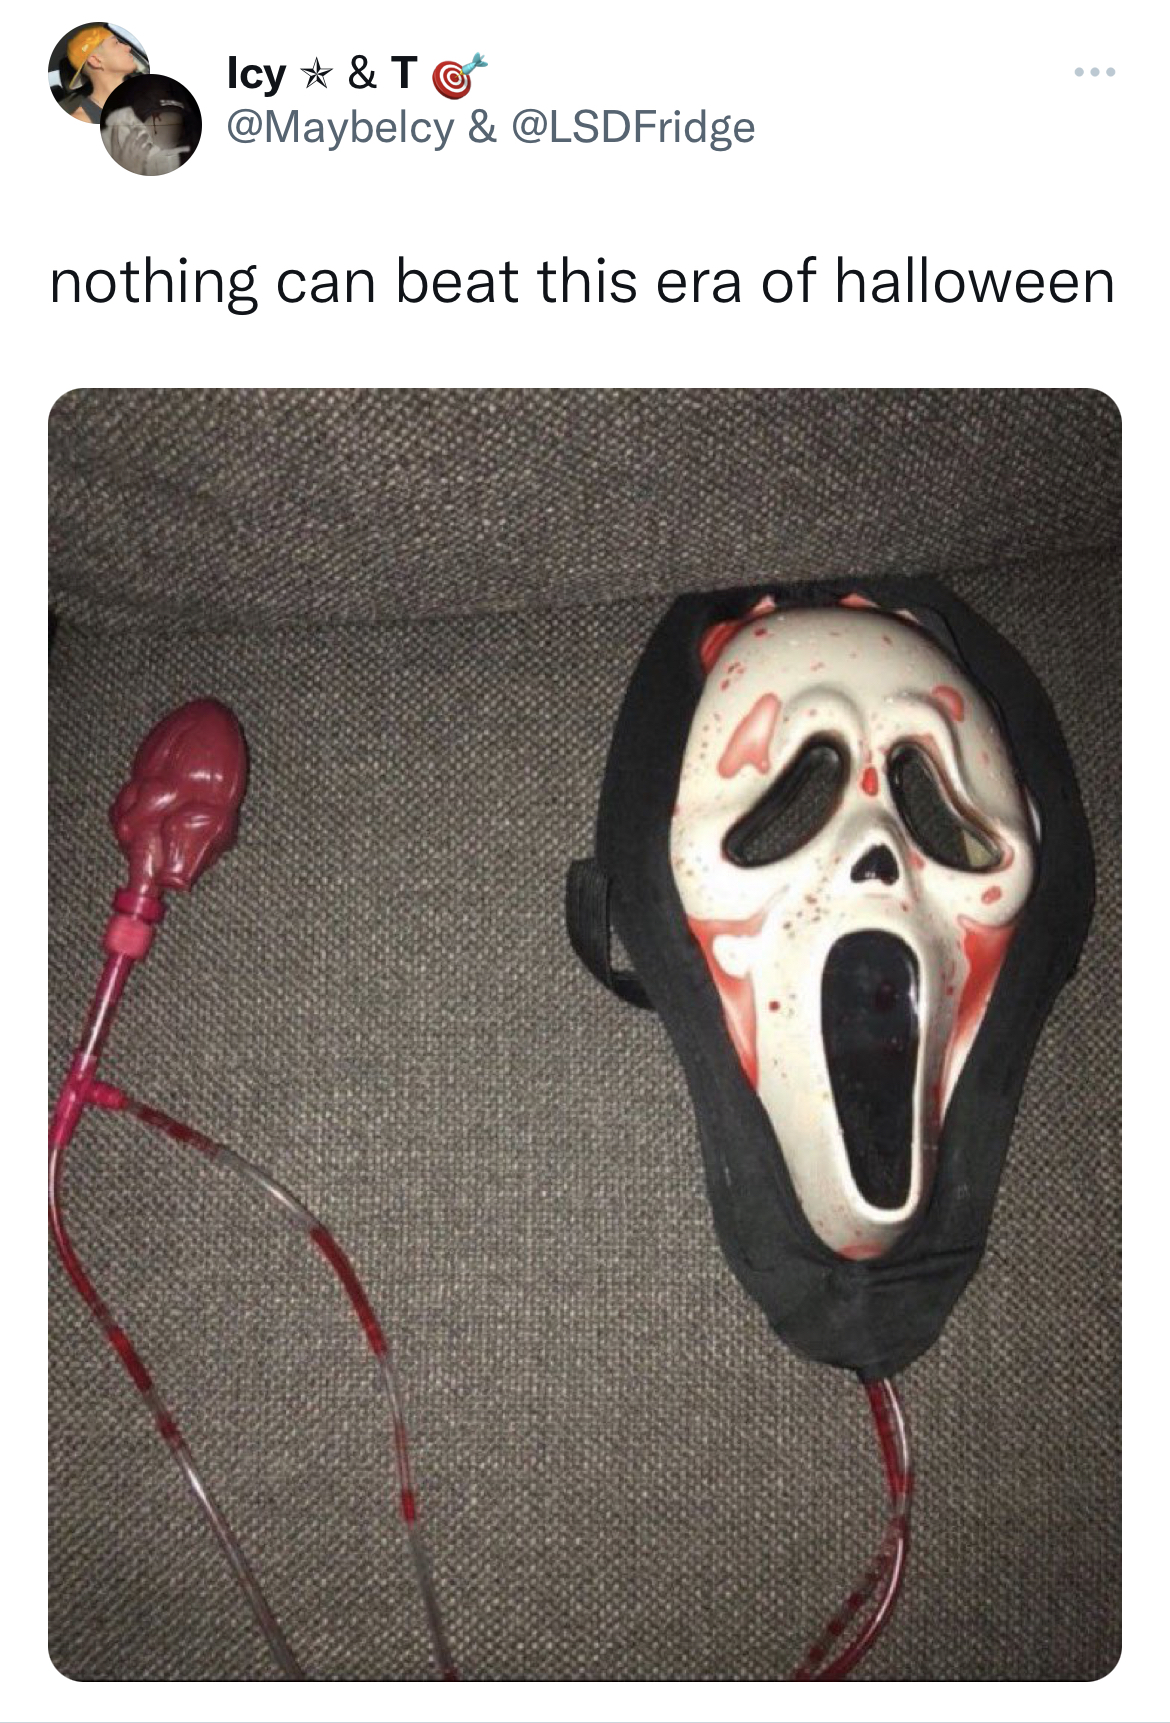 savage tweets to start the week - mask - Icy & T & nothing can beat this era of halloween